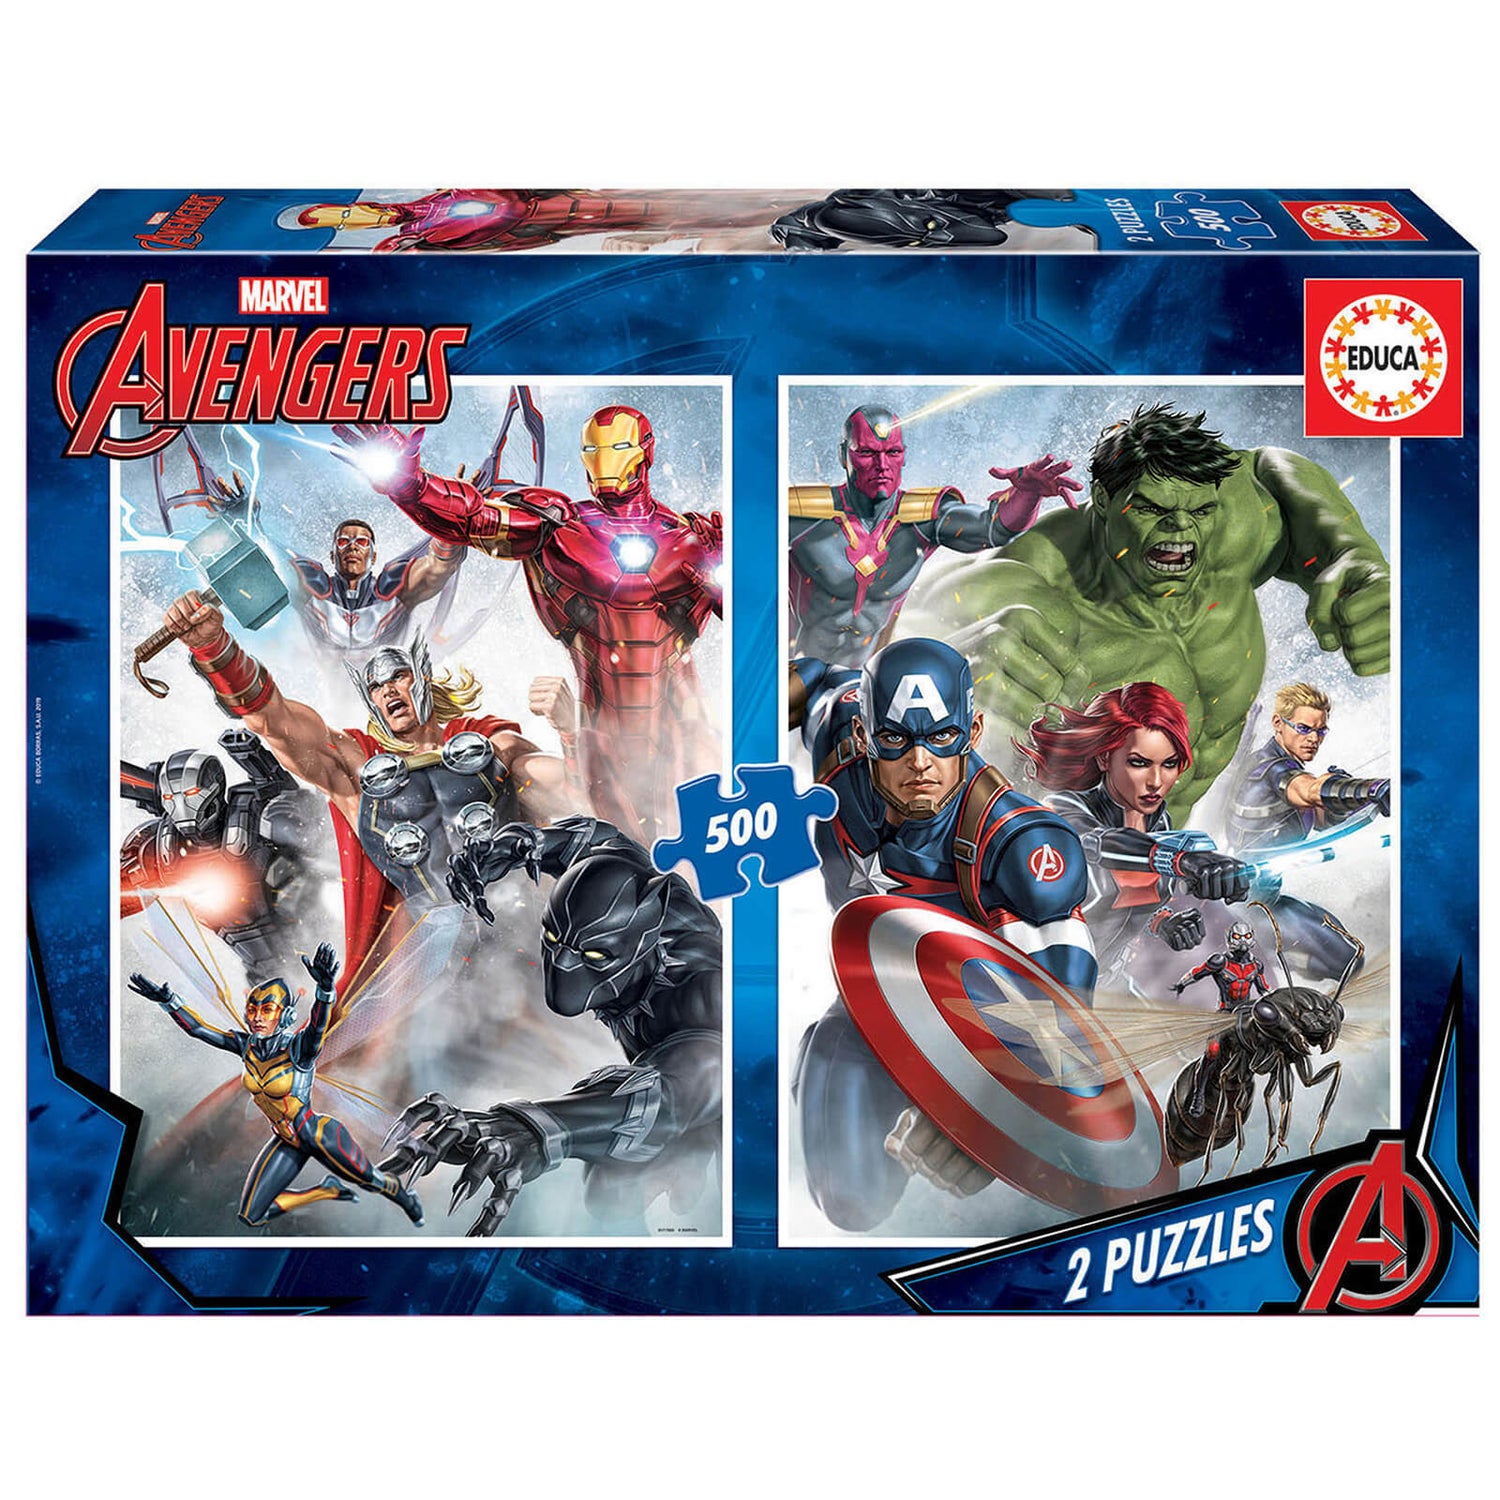 Marvel Avengers 2-in-1 Jigsaw Puzzles (500 Pieces)